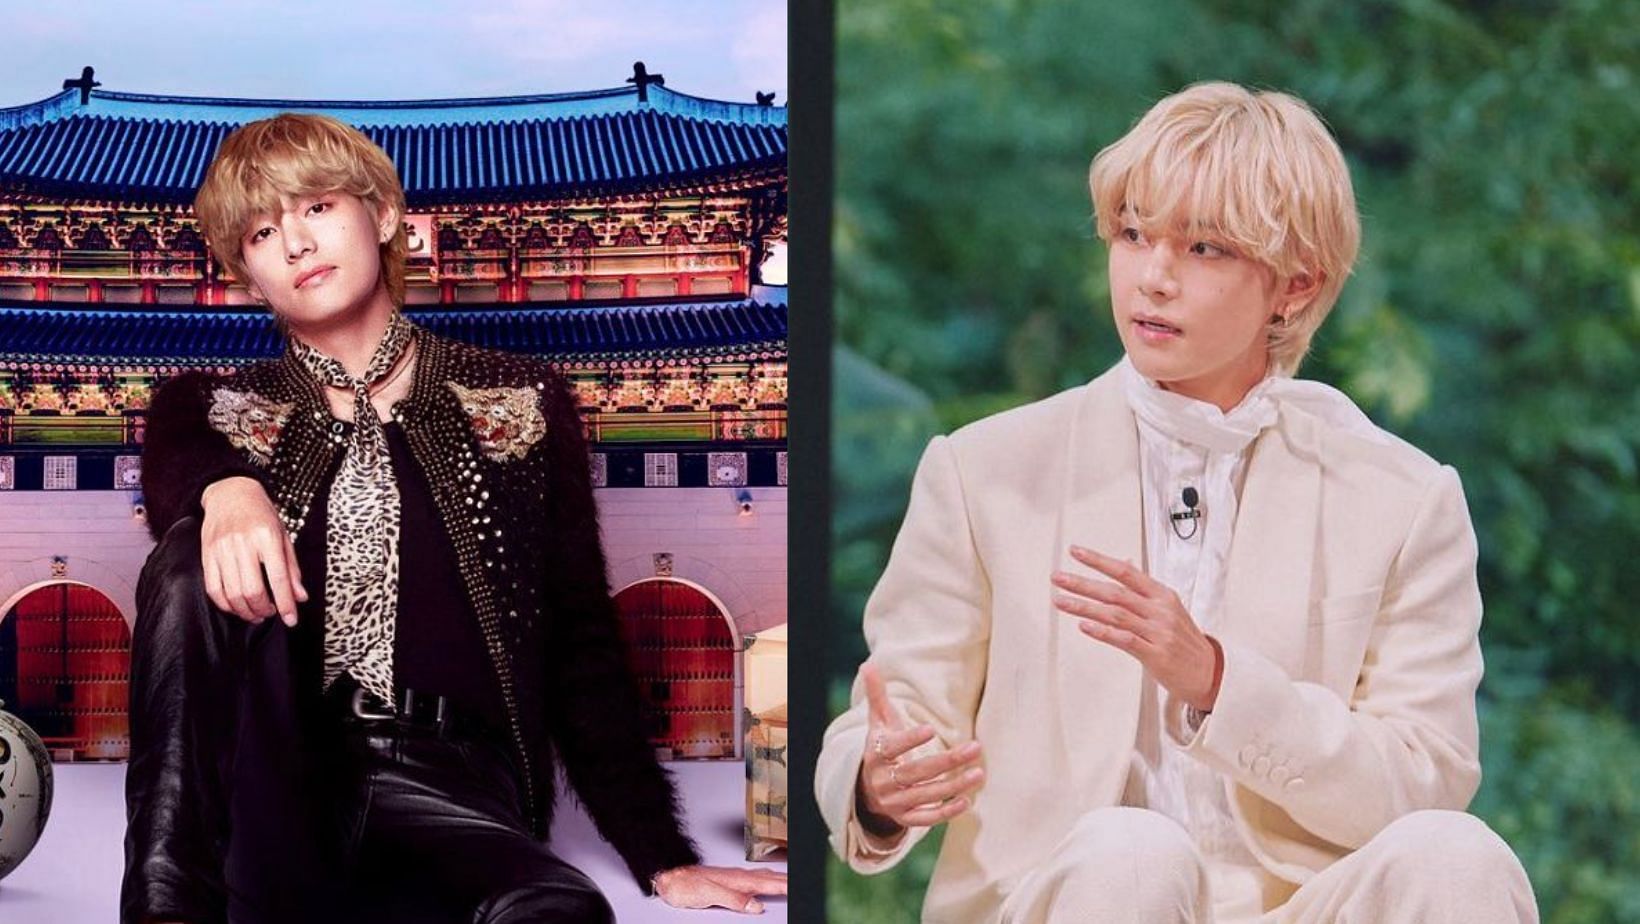 &quot;The national treasure&quot;: Fans euphoric as Taehyung